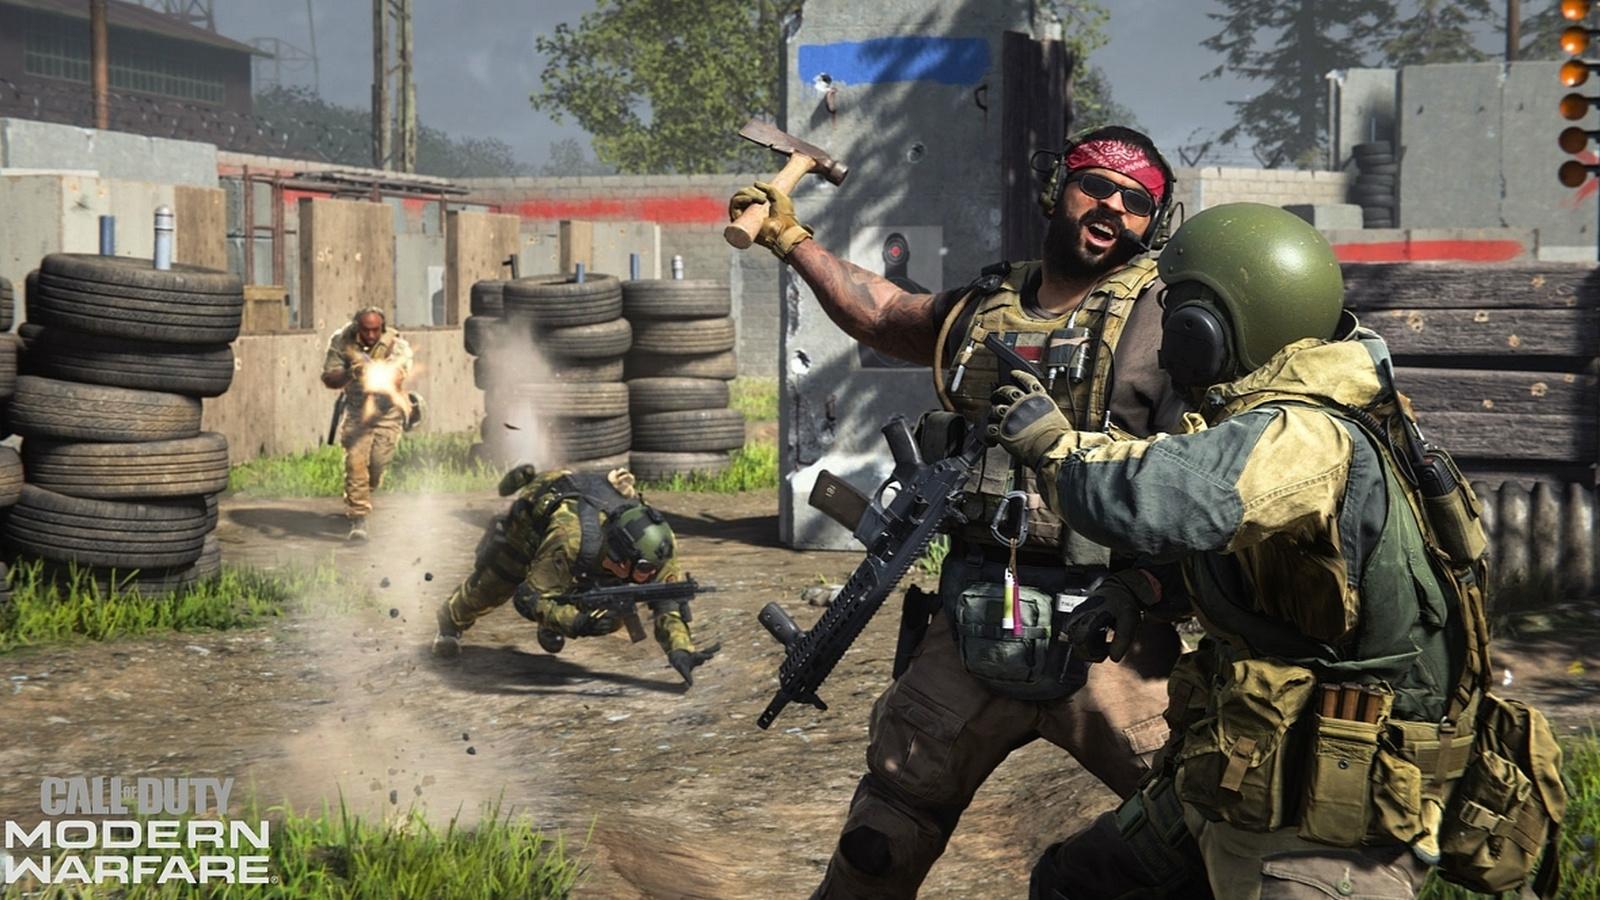 Call of Duty characters fighting within Modern Warfare